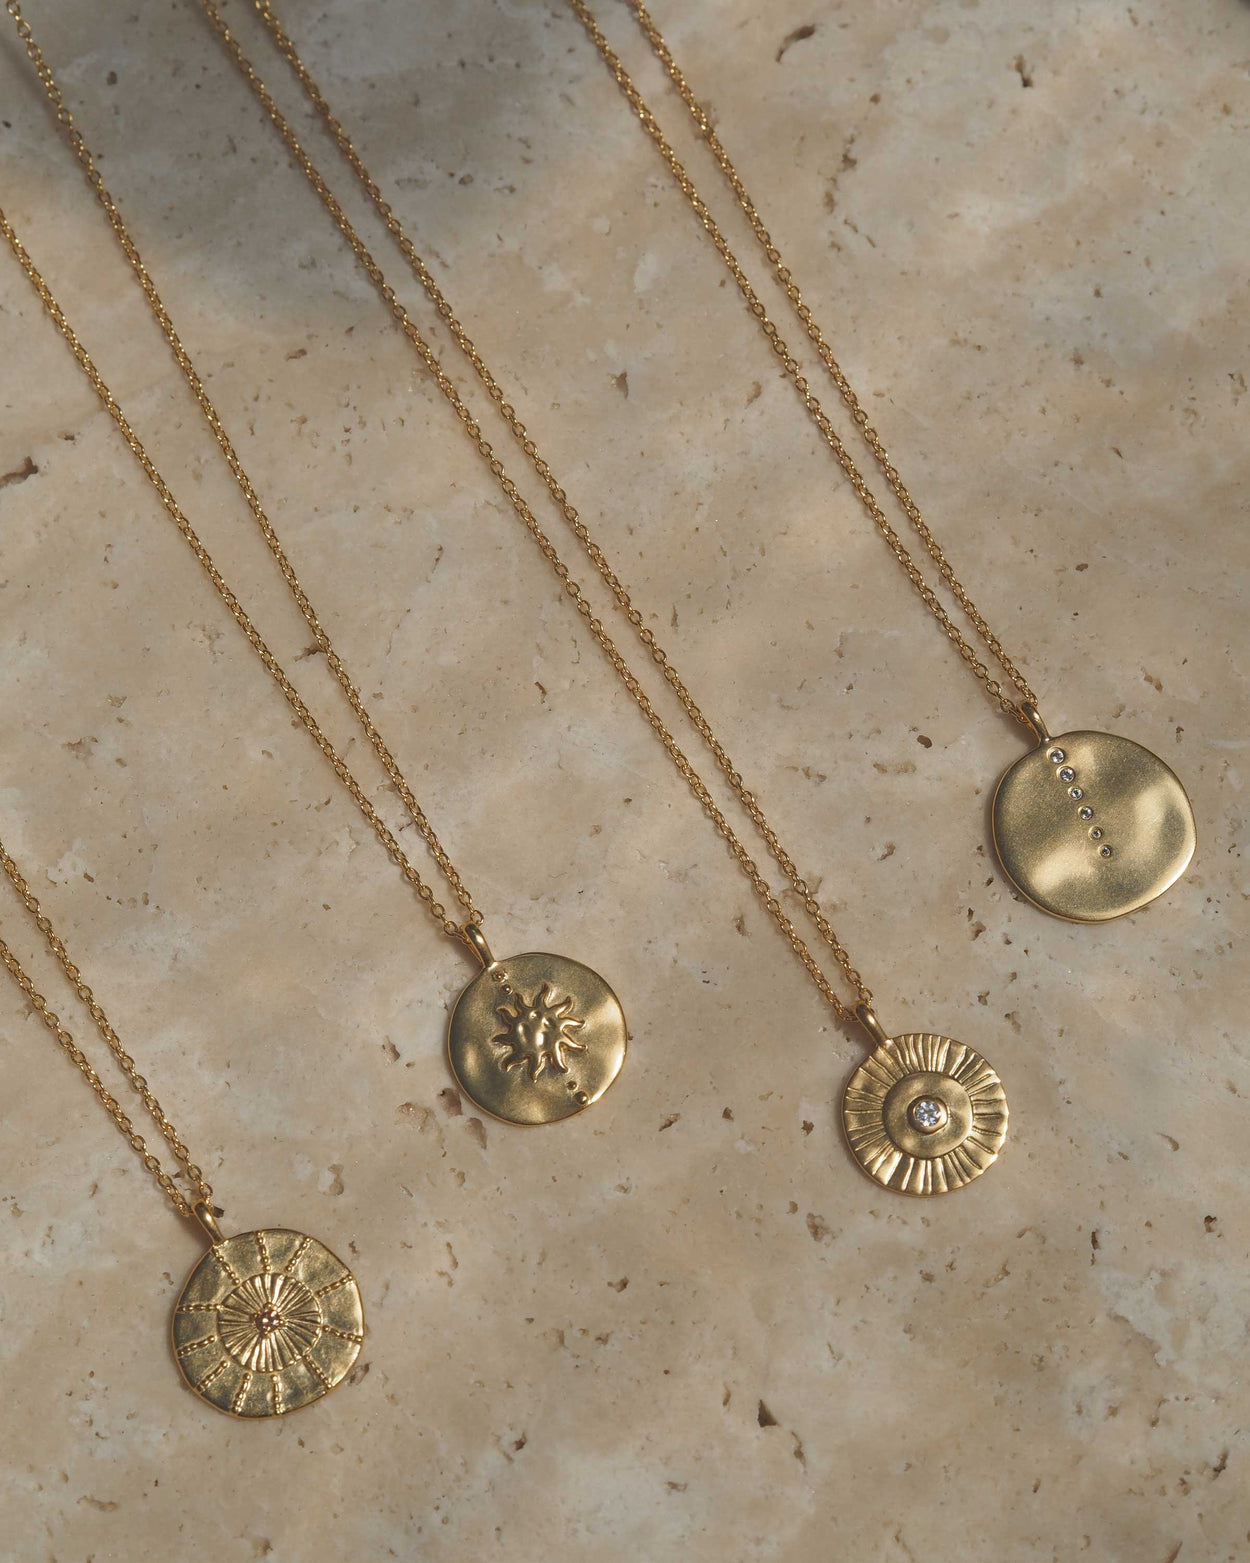 SUN LINES COIN NECKLACE (STERLING SILVER)